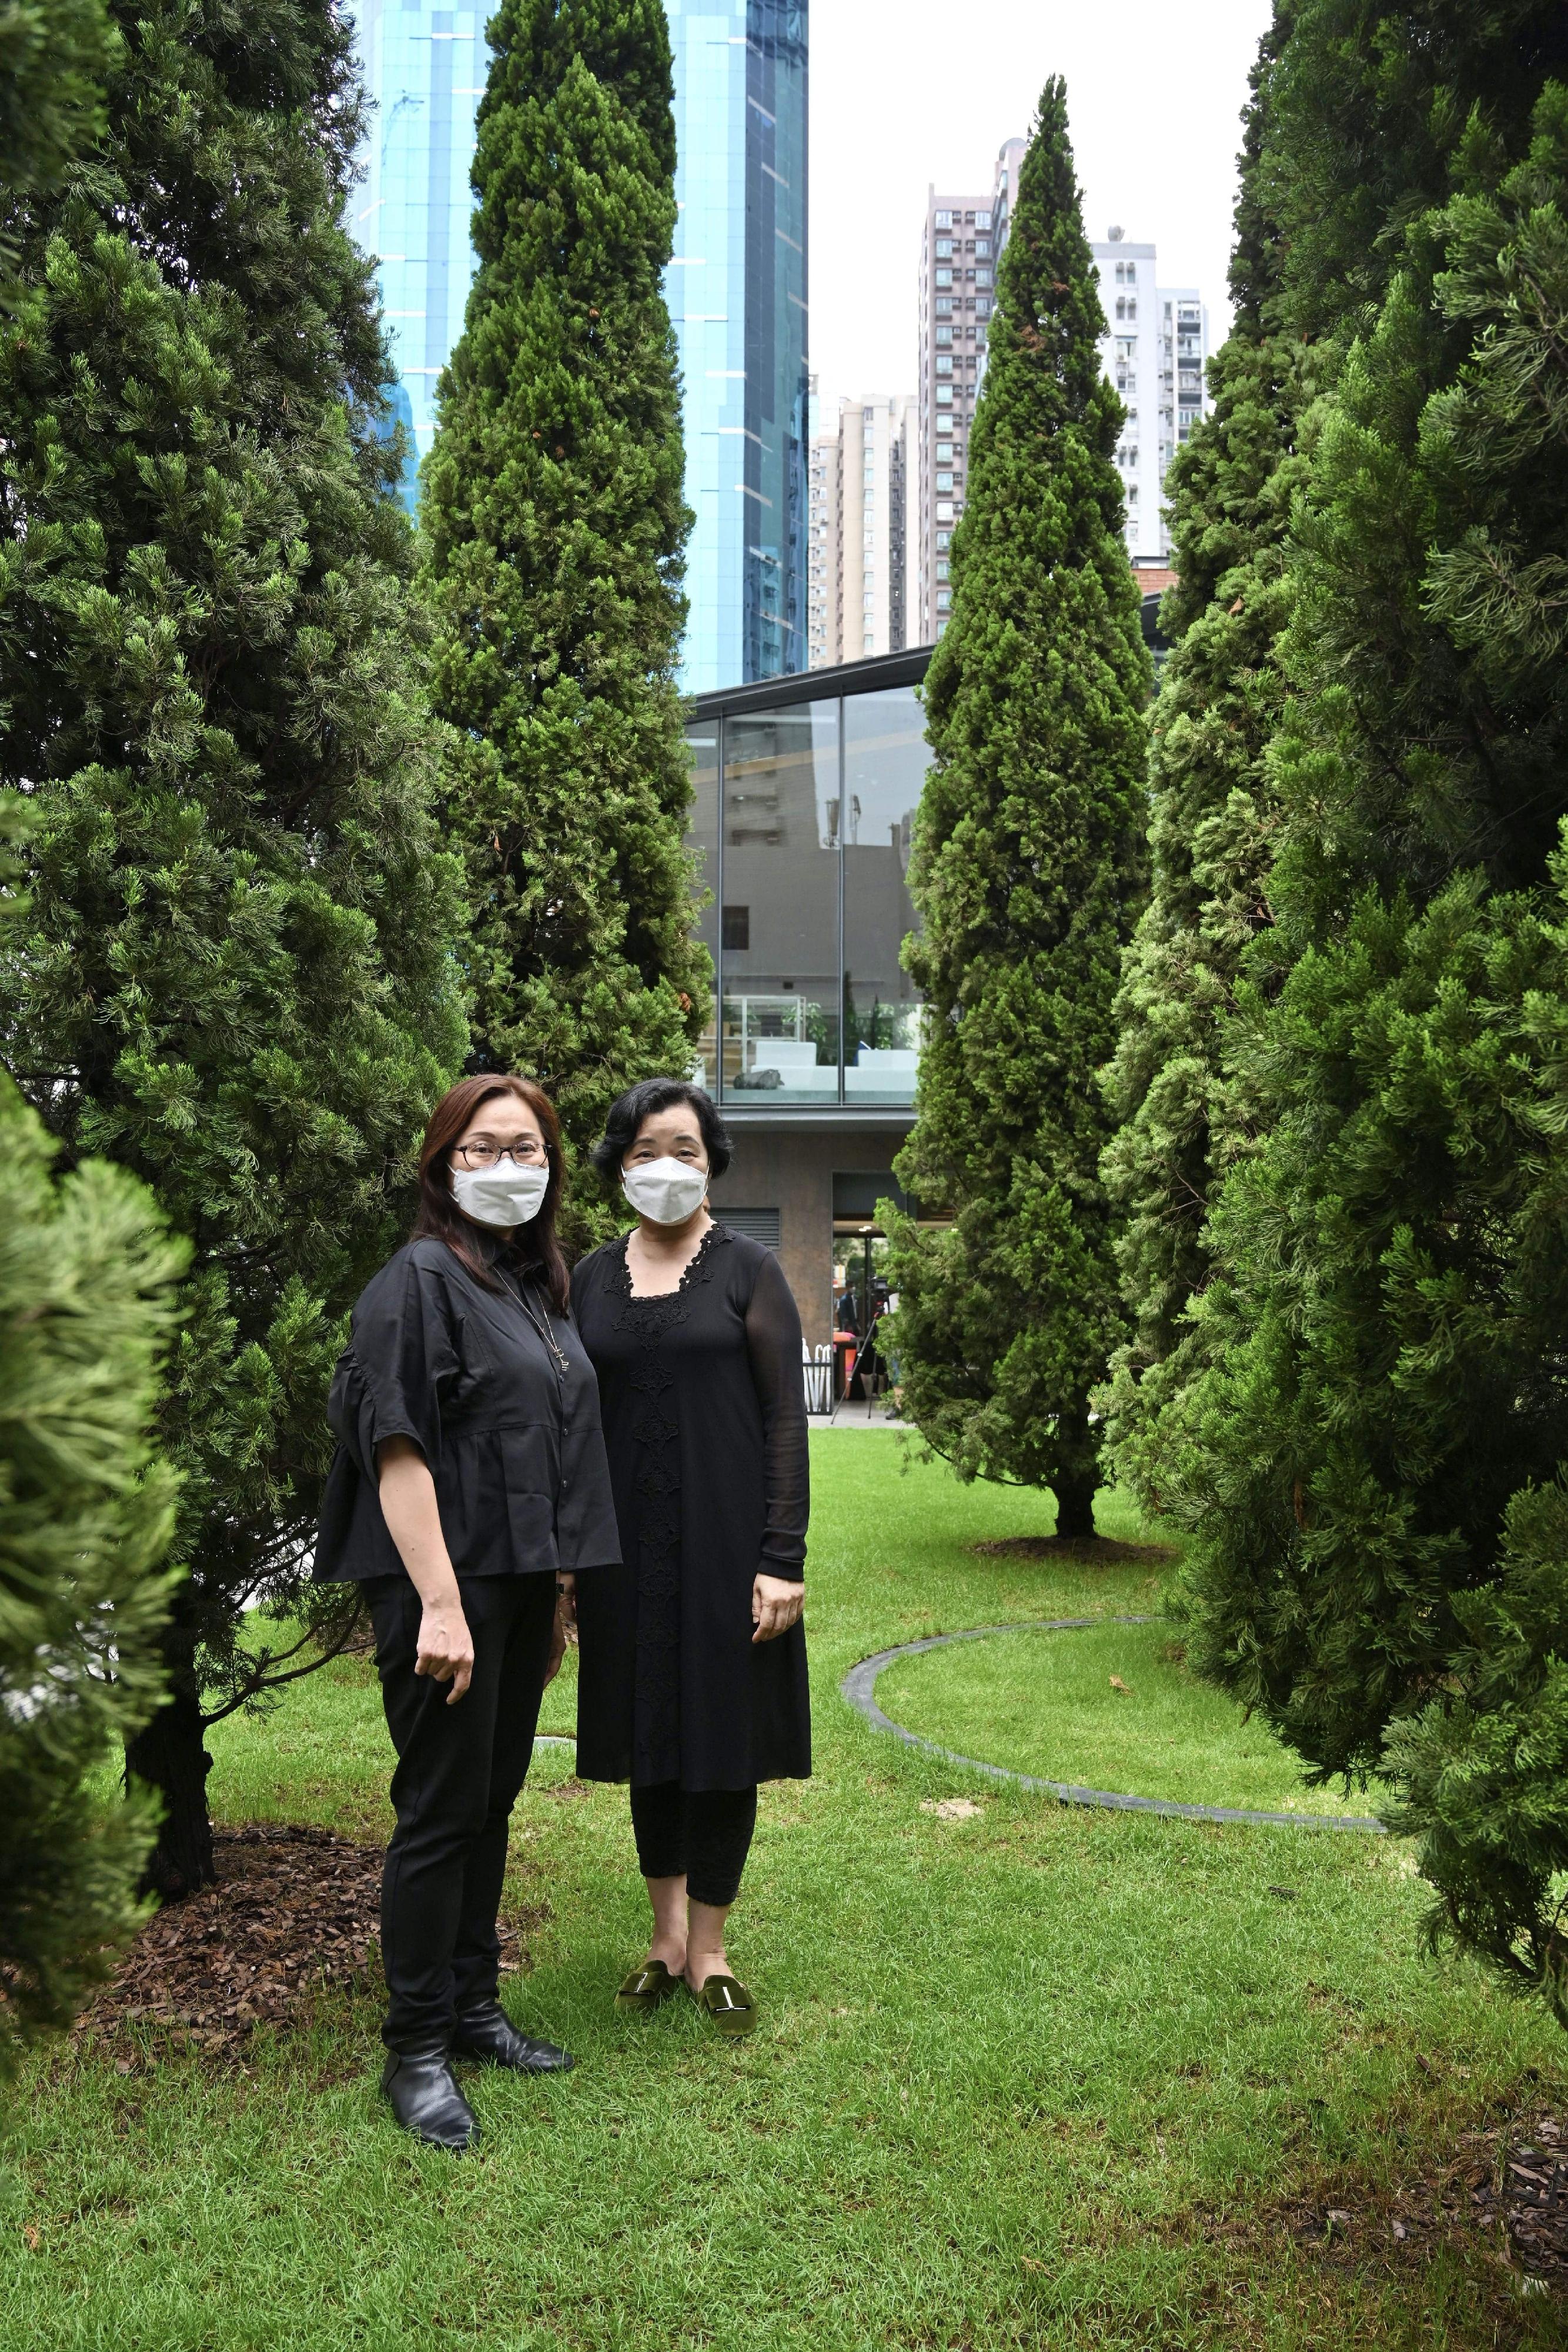 The new extension of the Oil Street Art Space (Oi!) will be open to the public tomorrow (May 24). Photo shows the Head of the Art Promotion Office, Dr Lesley Lau (right), with the Curator of Oi!, Ms Joan Chung (left), at the "Joyful Trees (Arbores Laetae)" installation.